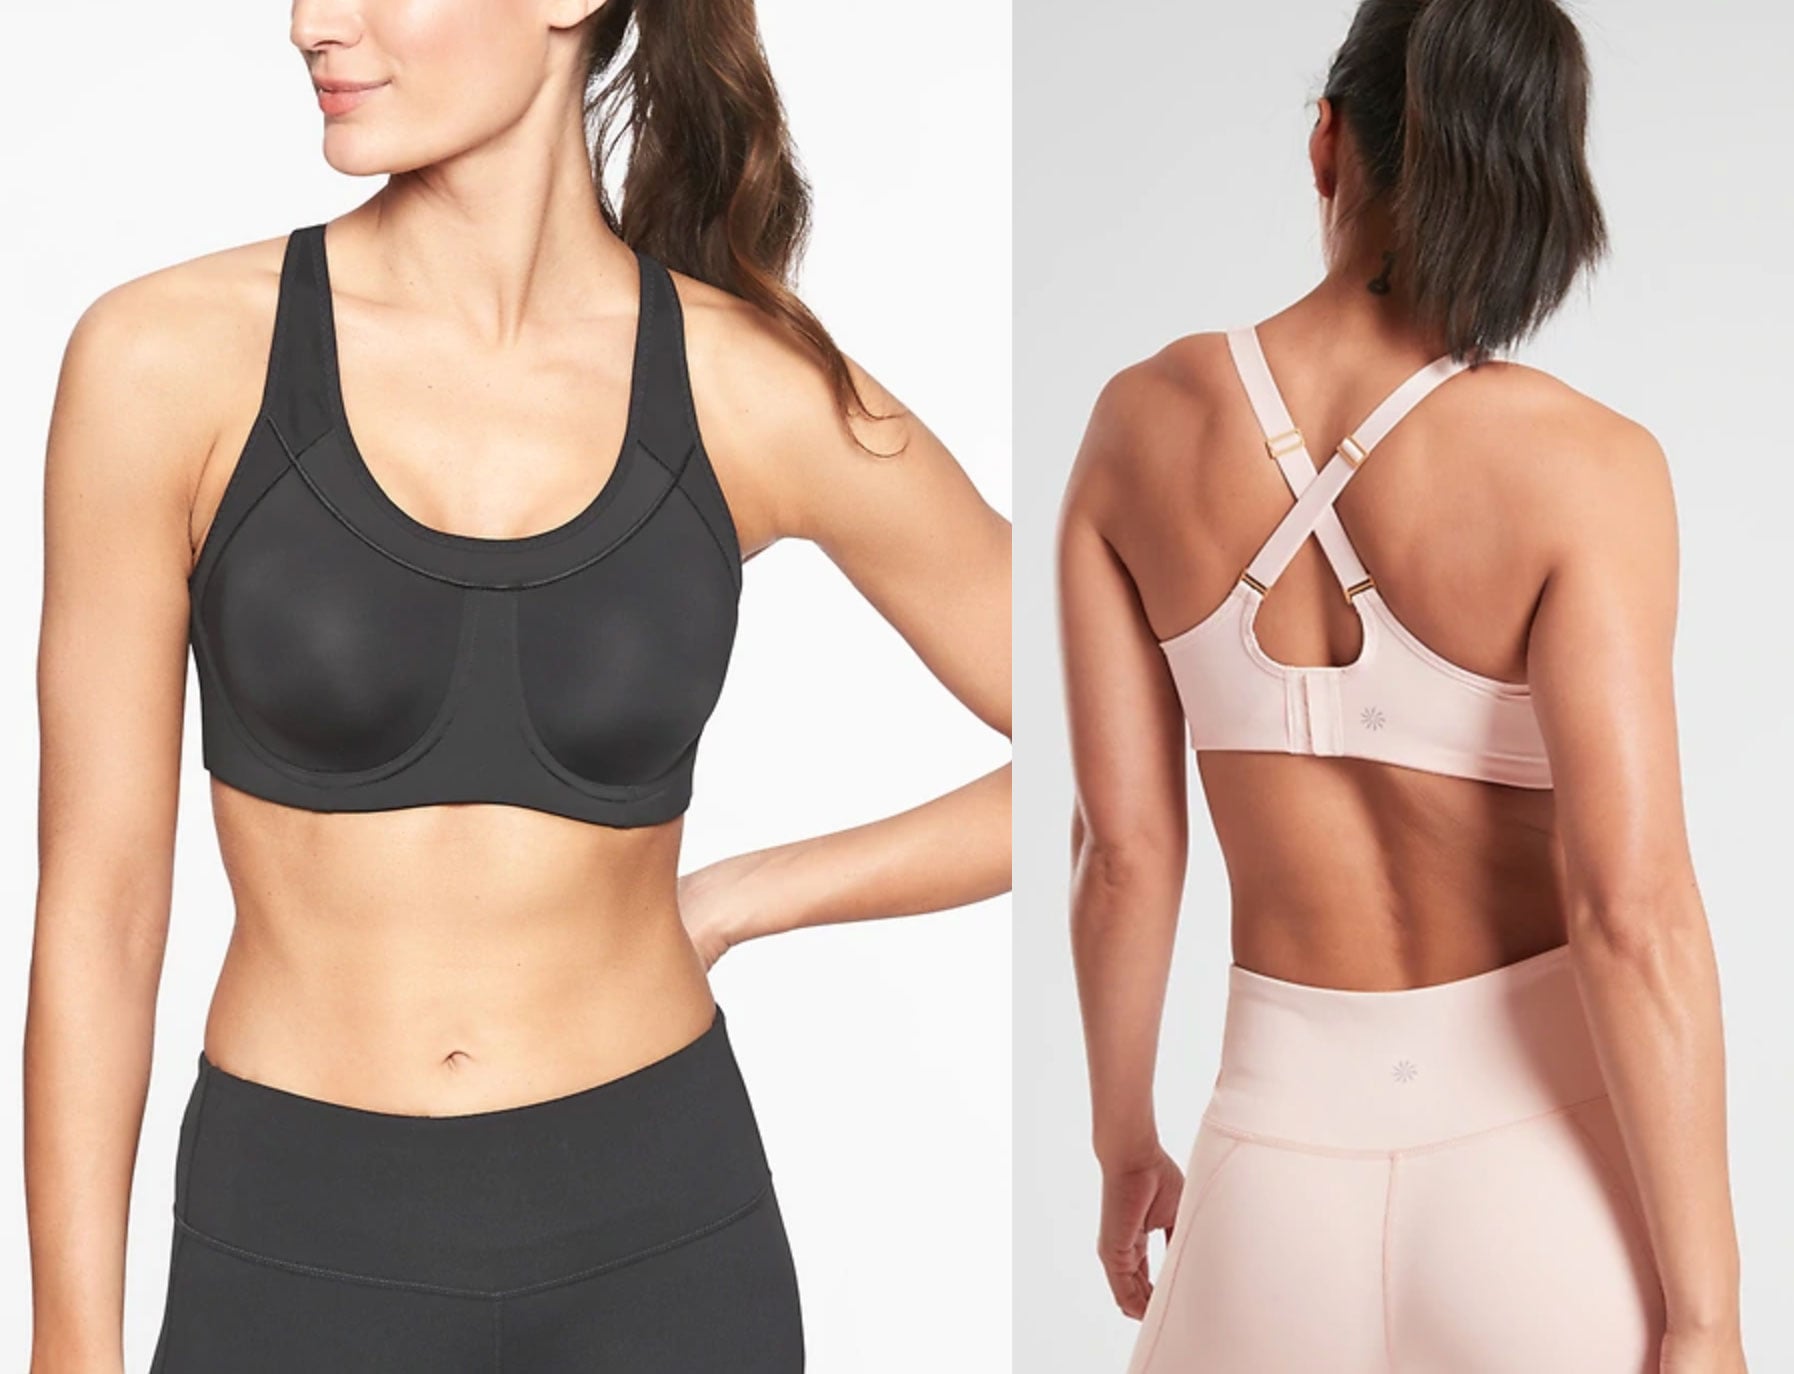 Athleta Glory 2.0 Bra, It's the Season of Love, and We're Infatuated With  These Health and Fitness Products